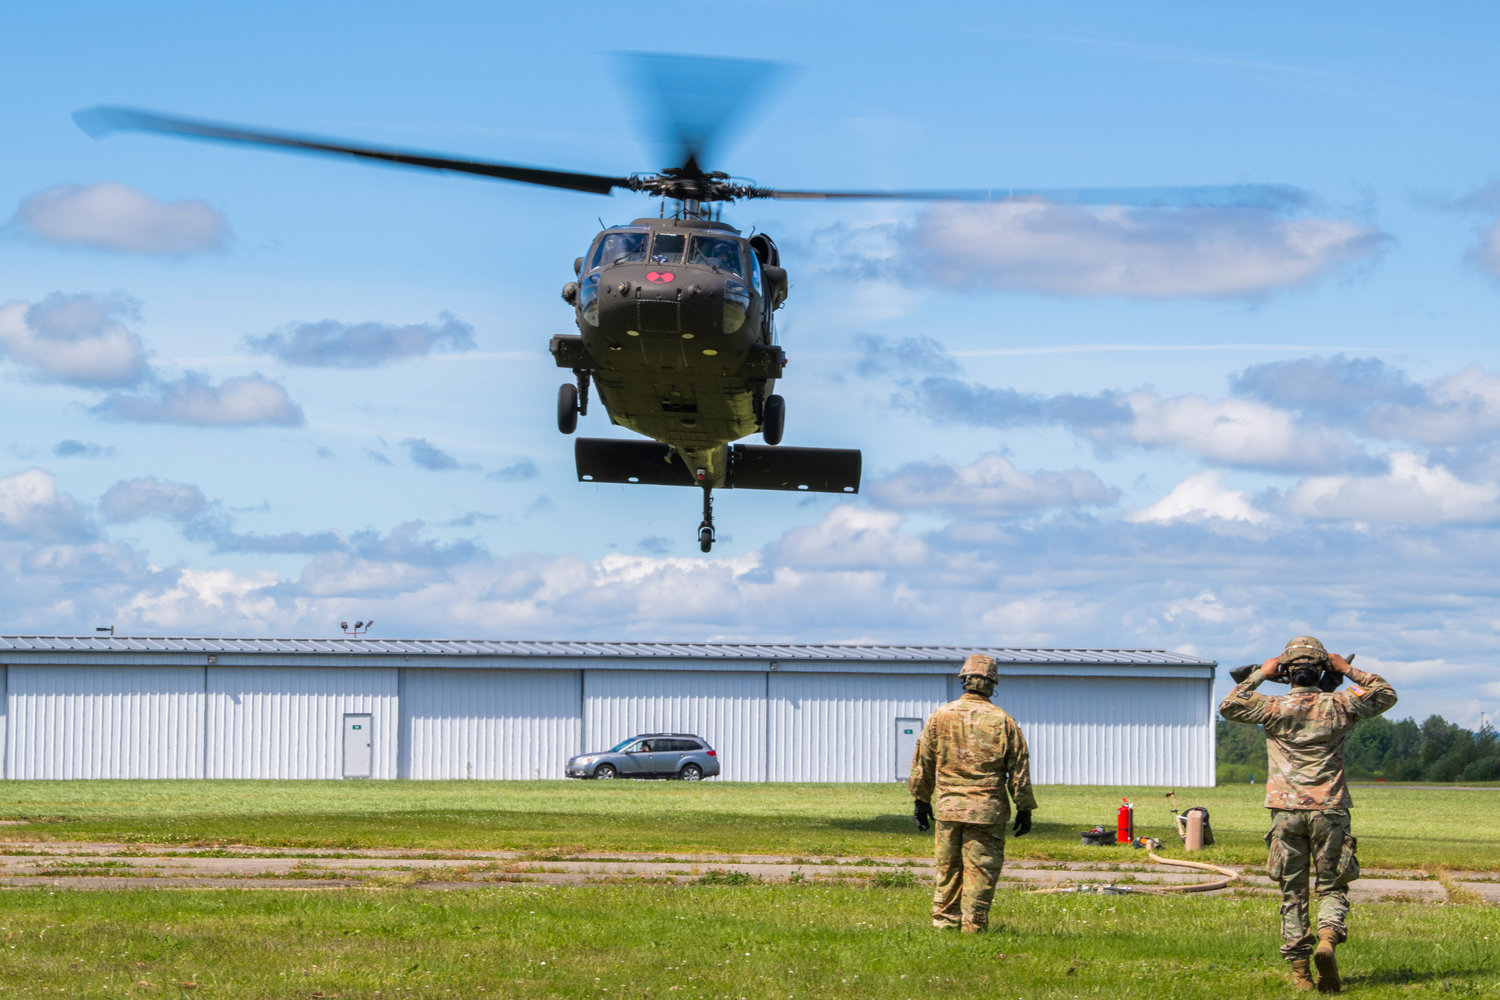 A Black Hawk helicopter from Joint Base Lewis-McChord hovers above the Chehalis-Centralia Airport on Wednesday afternoon. The airport hosted training exercises focused on refueling helicopters.